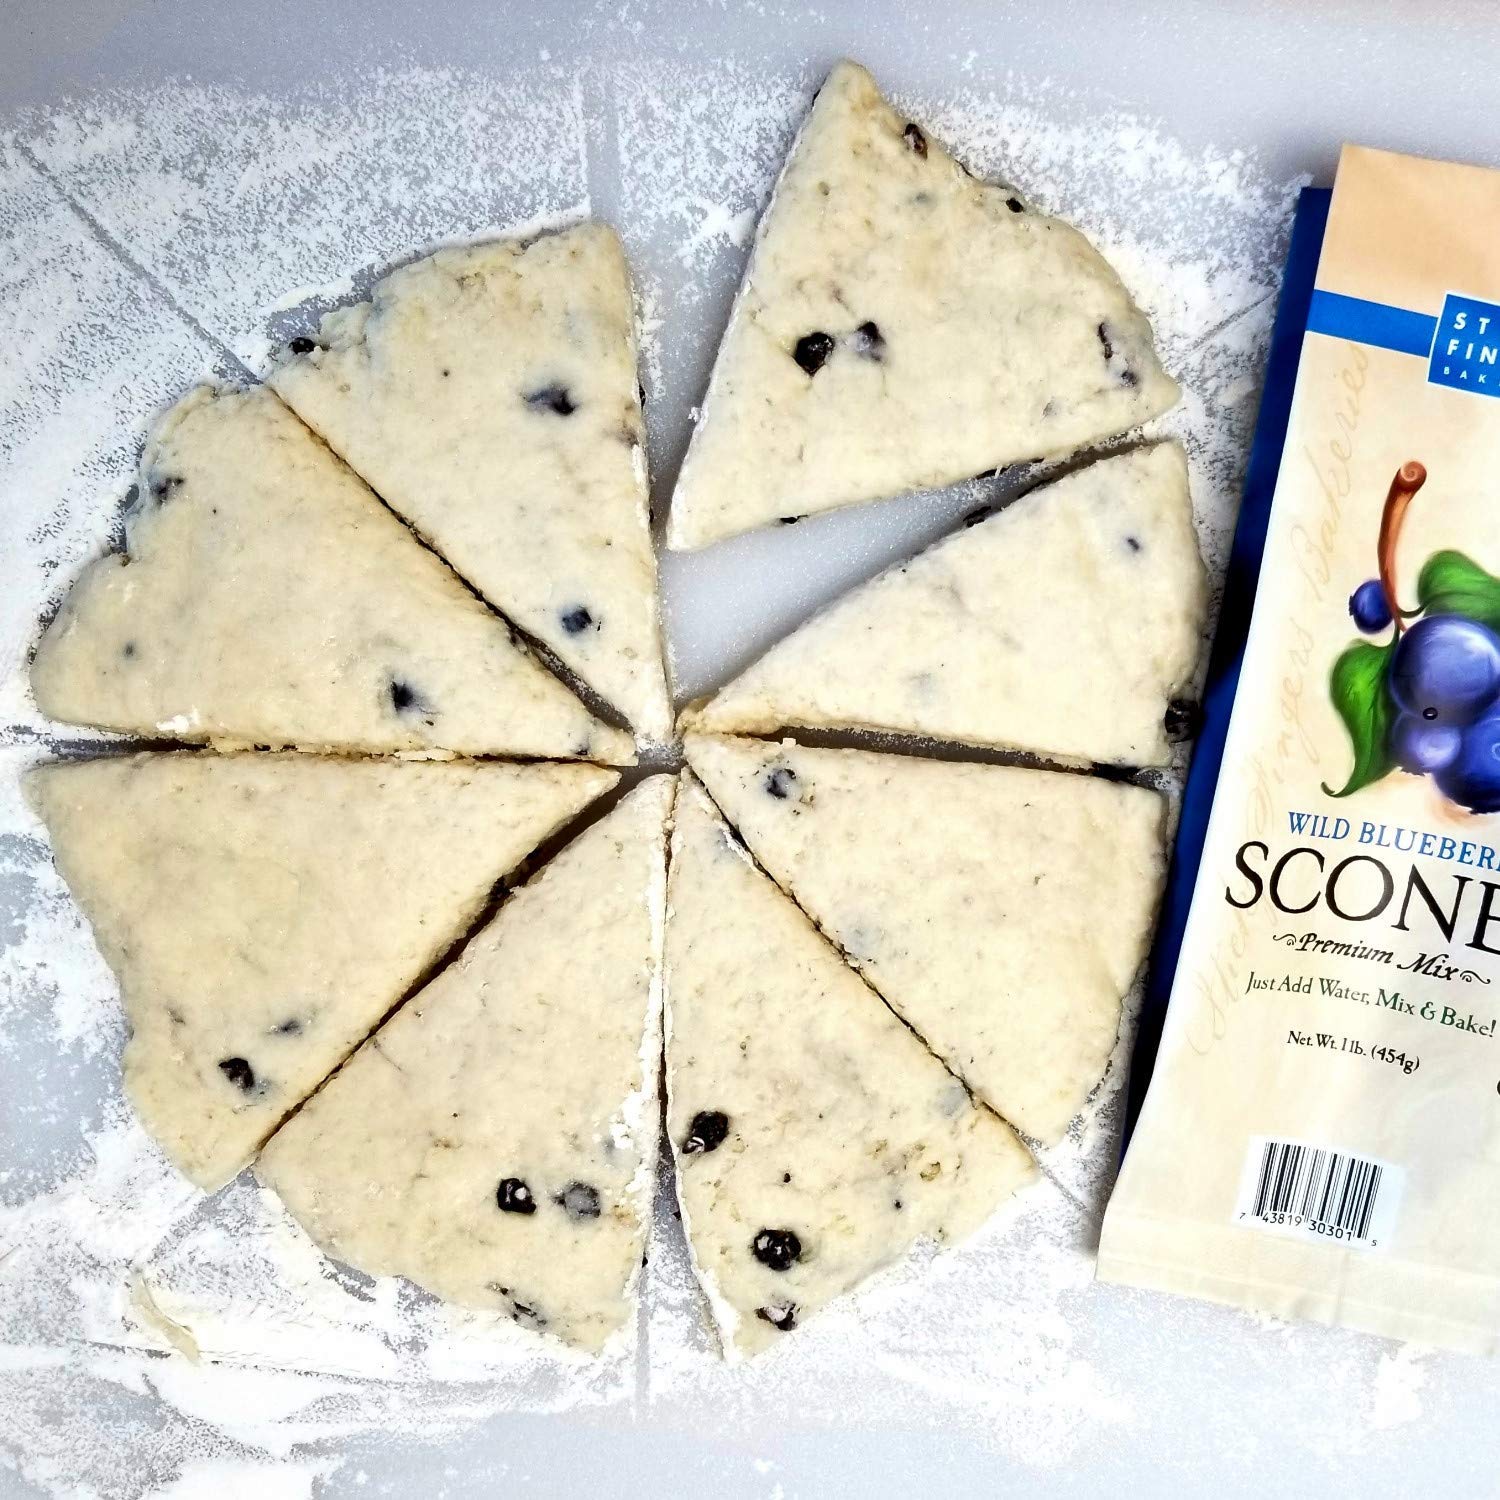 English Scone Mix, Original & Wild Blueberry Bundle by Sticky Fingers Bakeries – Easy to Make English Scones Fresh Baked, Makes 12 Scones (4pk)